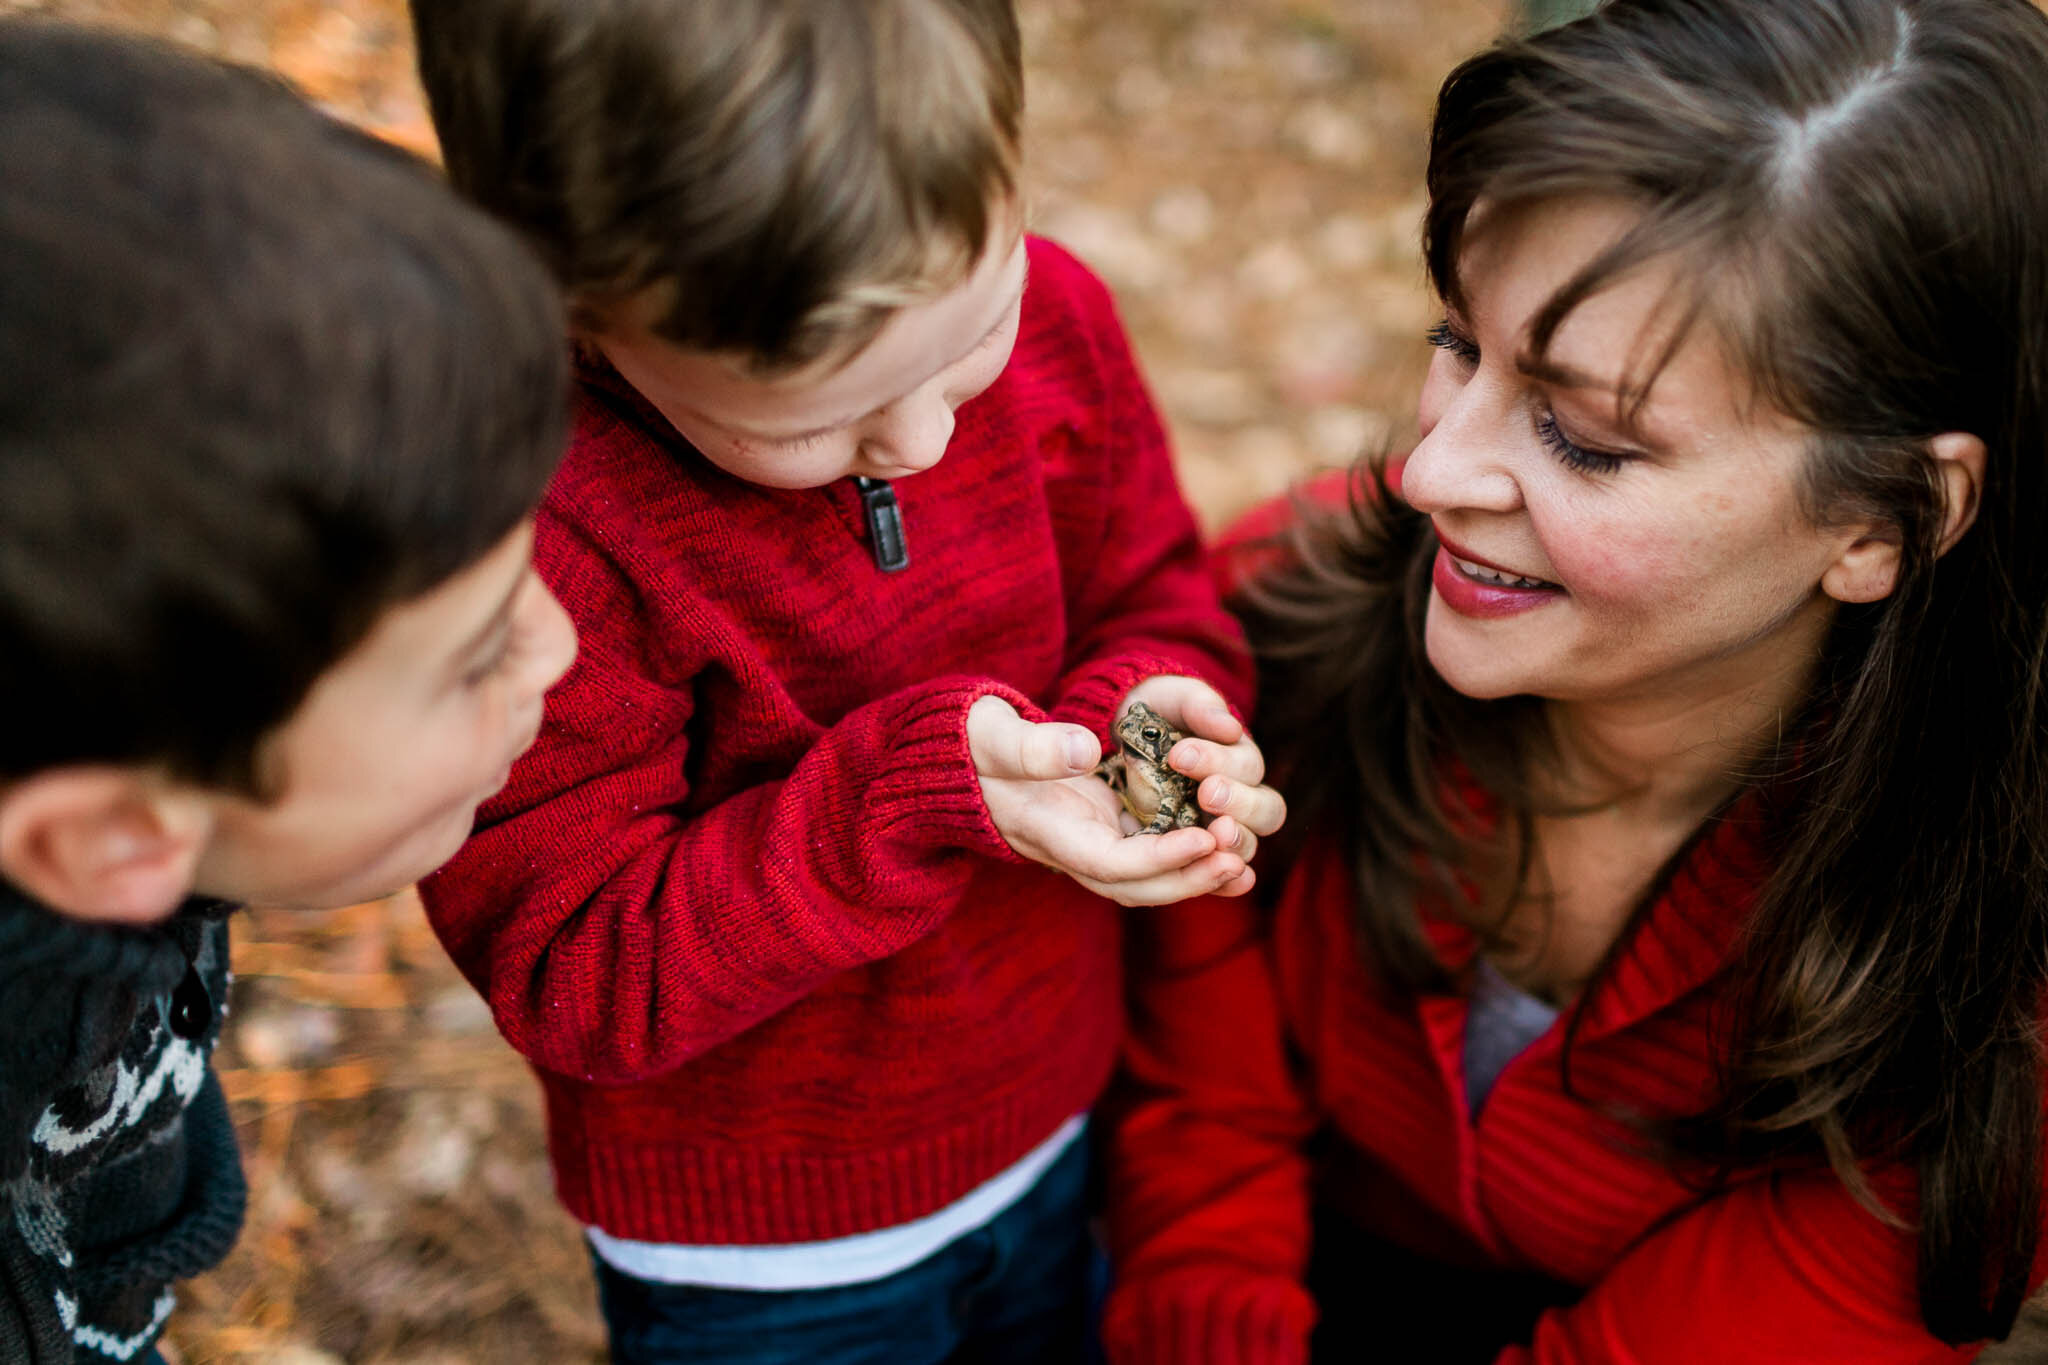 Raleigh Family Photographer | By G. Lin Photography | Young boy holding a toad